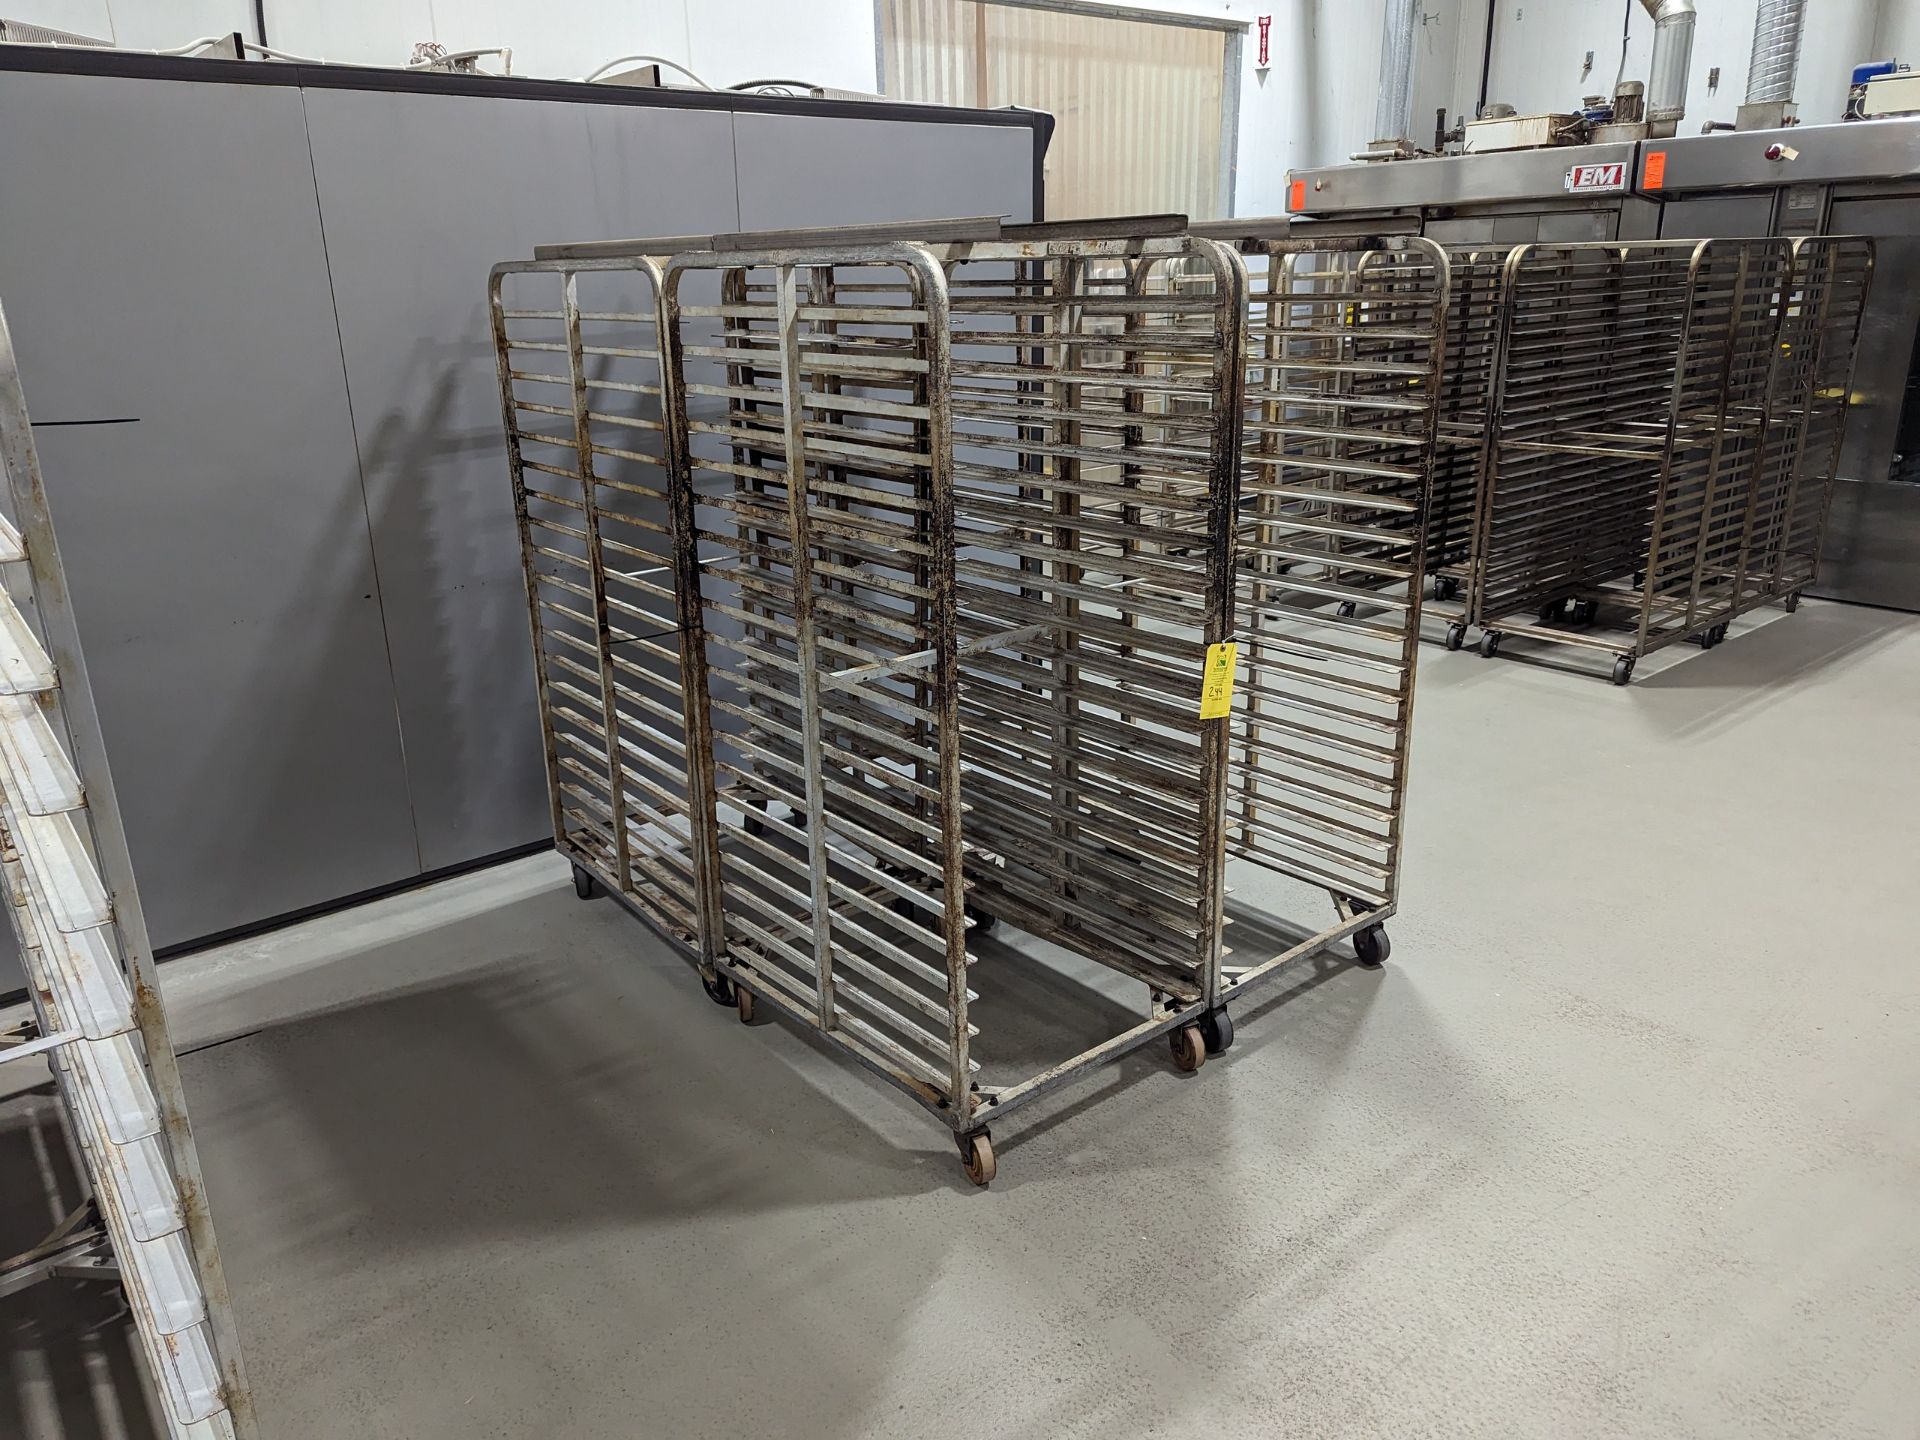 Lot of 4 Double Wide Aluminum Bakery Racks, Dimensions LxWxH: 72x57x69 Measurements are for lot of - Image 2 of 7